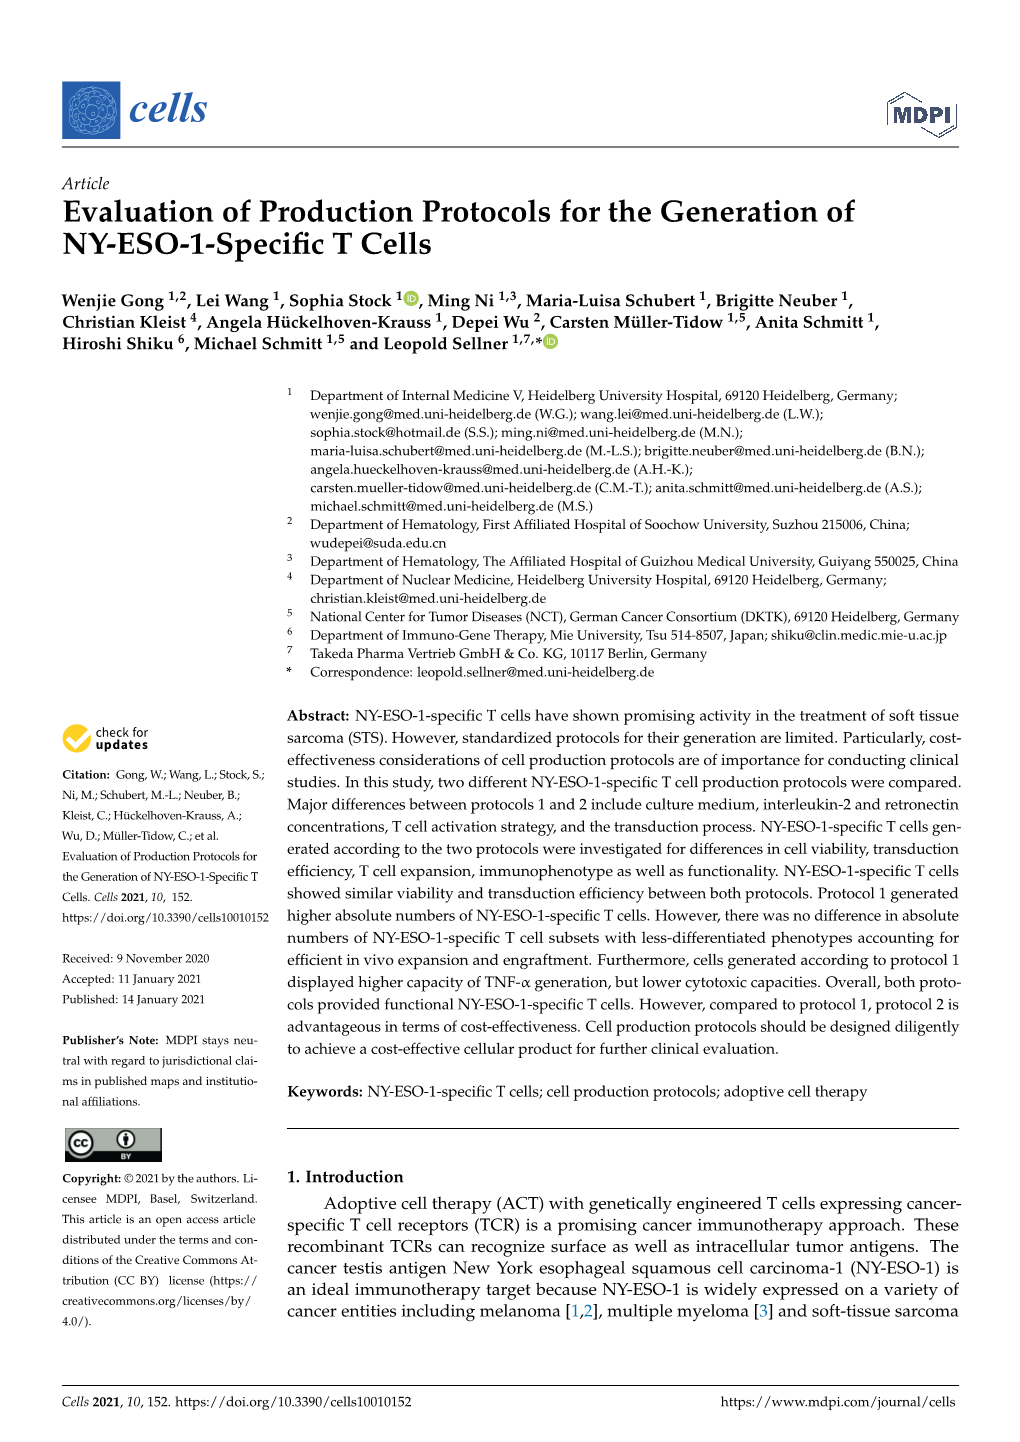 Evaluation of Production Protocols for the Generation of NY-ESO-1-Speciﬁc T Cells